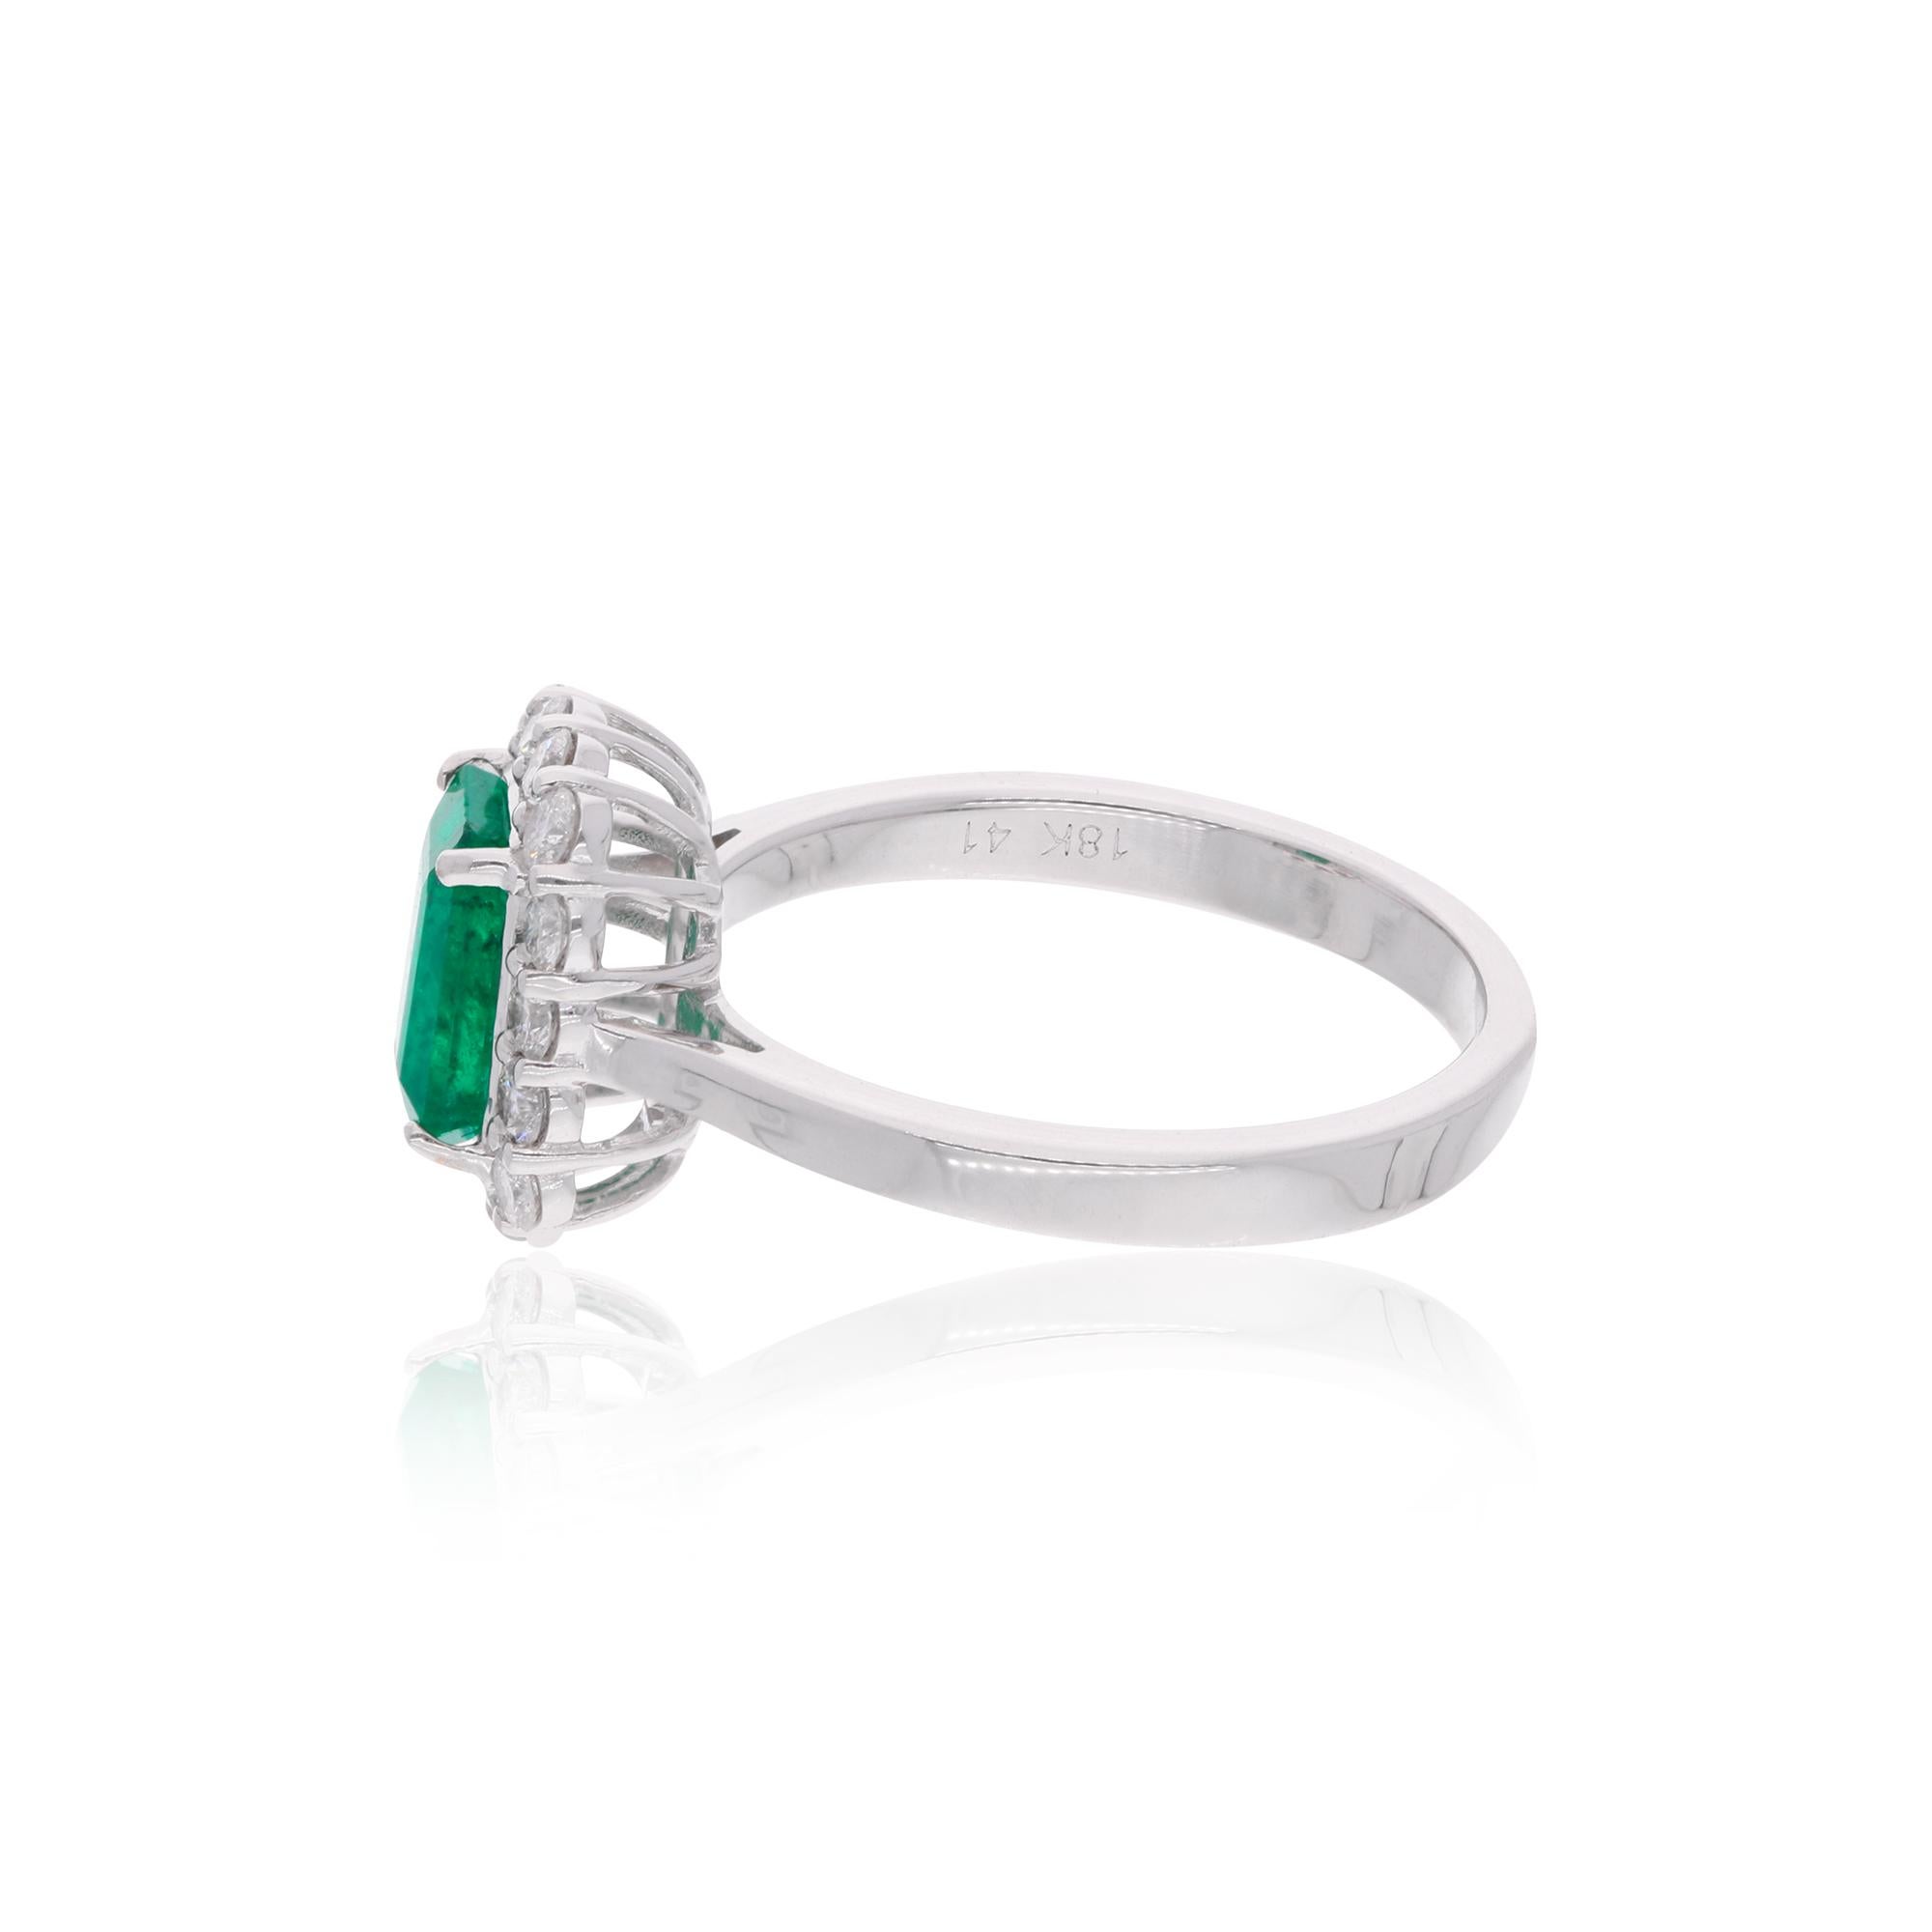 Item Code :- SER-22710
Gross Wt. :- 4.42 gm
18k Solid White Gold Wt. :- 4.10 gm
Natural Diamond Wt. :- 0.45 Ct. ( AVERAGE DIAMOND CLARITY SI1-SI2 & COLOR H-I )
Zambian Emerald Wt. :- 1.16 Ct.
Ring Size :- 7 US & All size available

✦